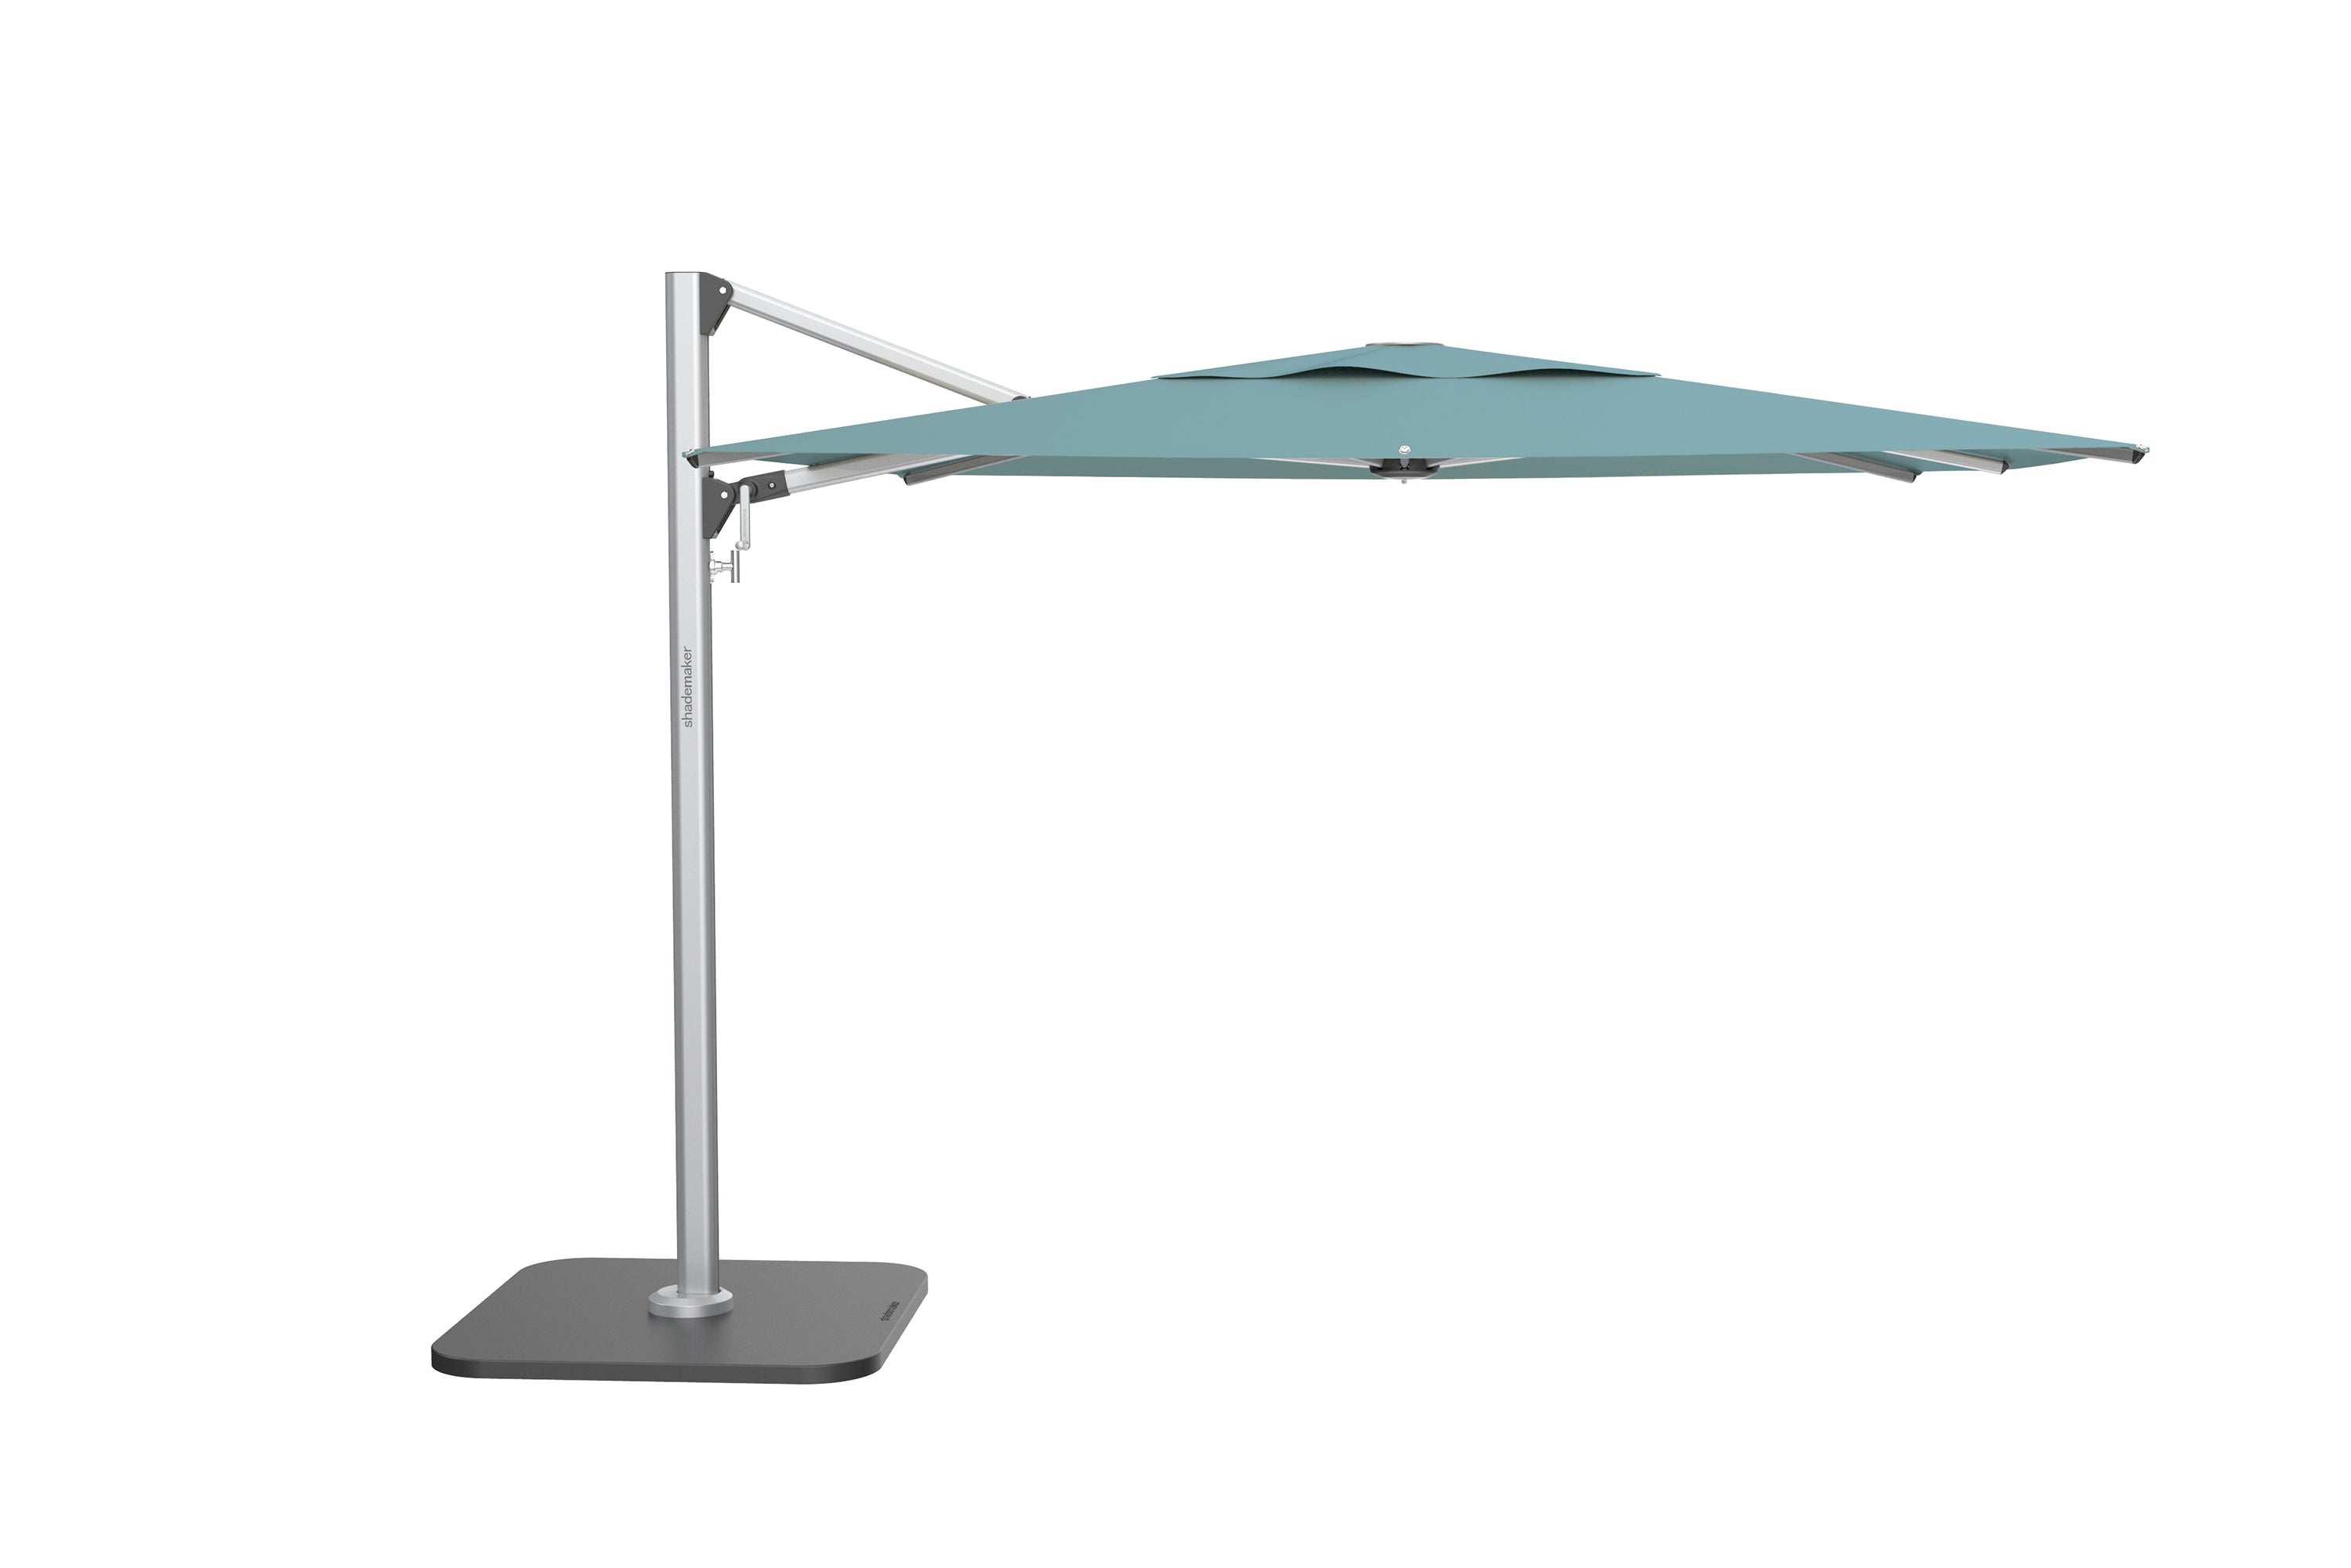 10 ft Octagon Solaris Cantilever by Shademaker